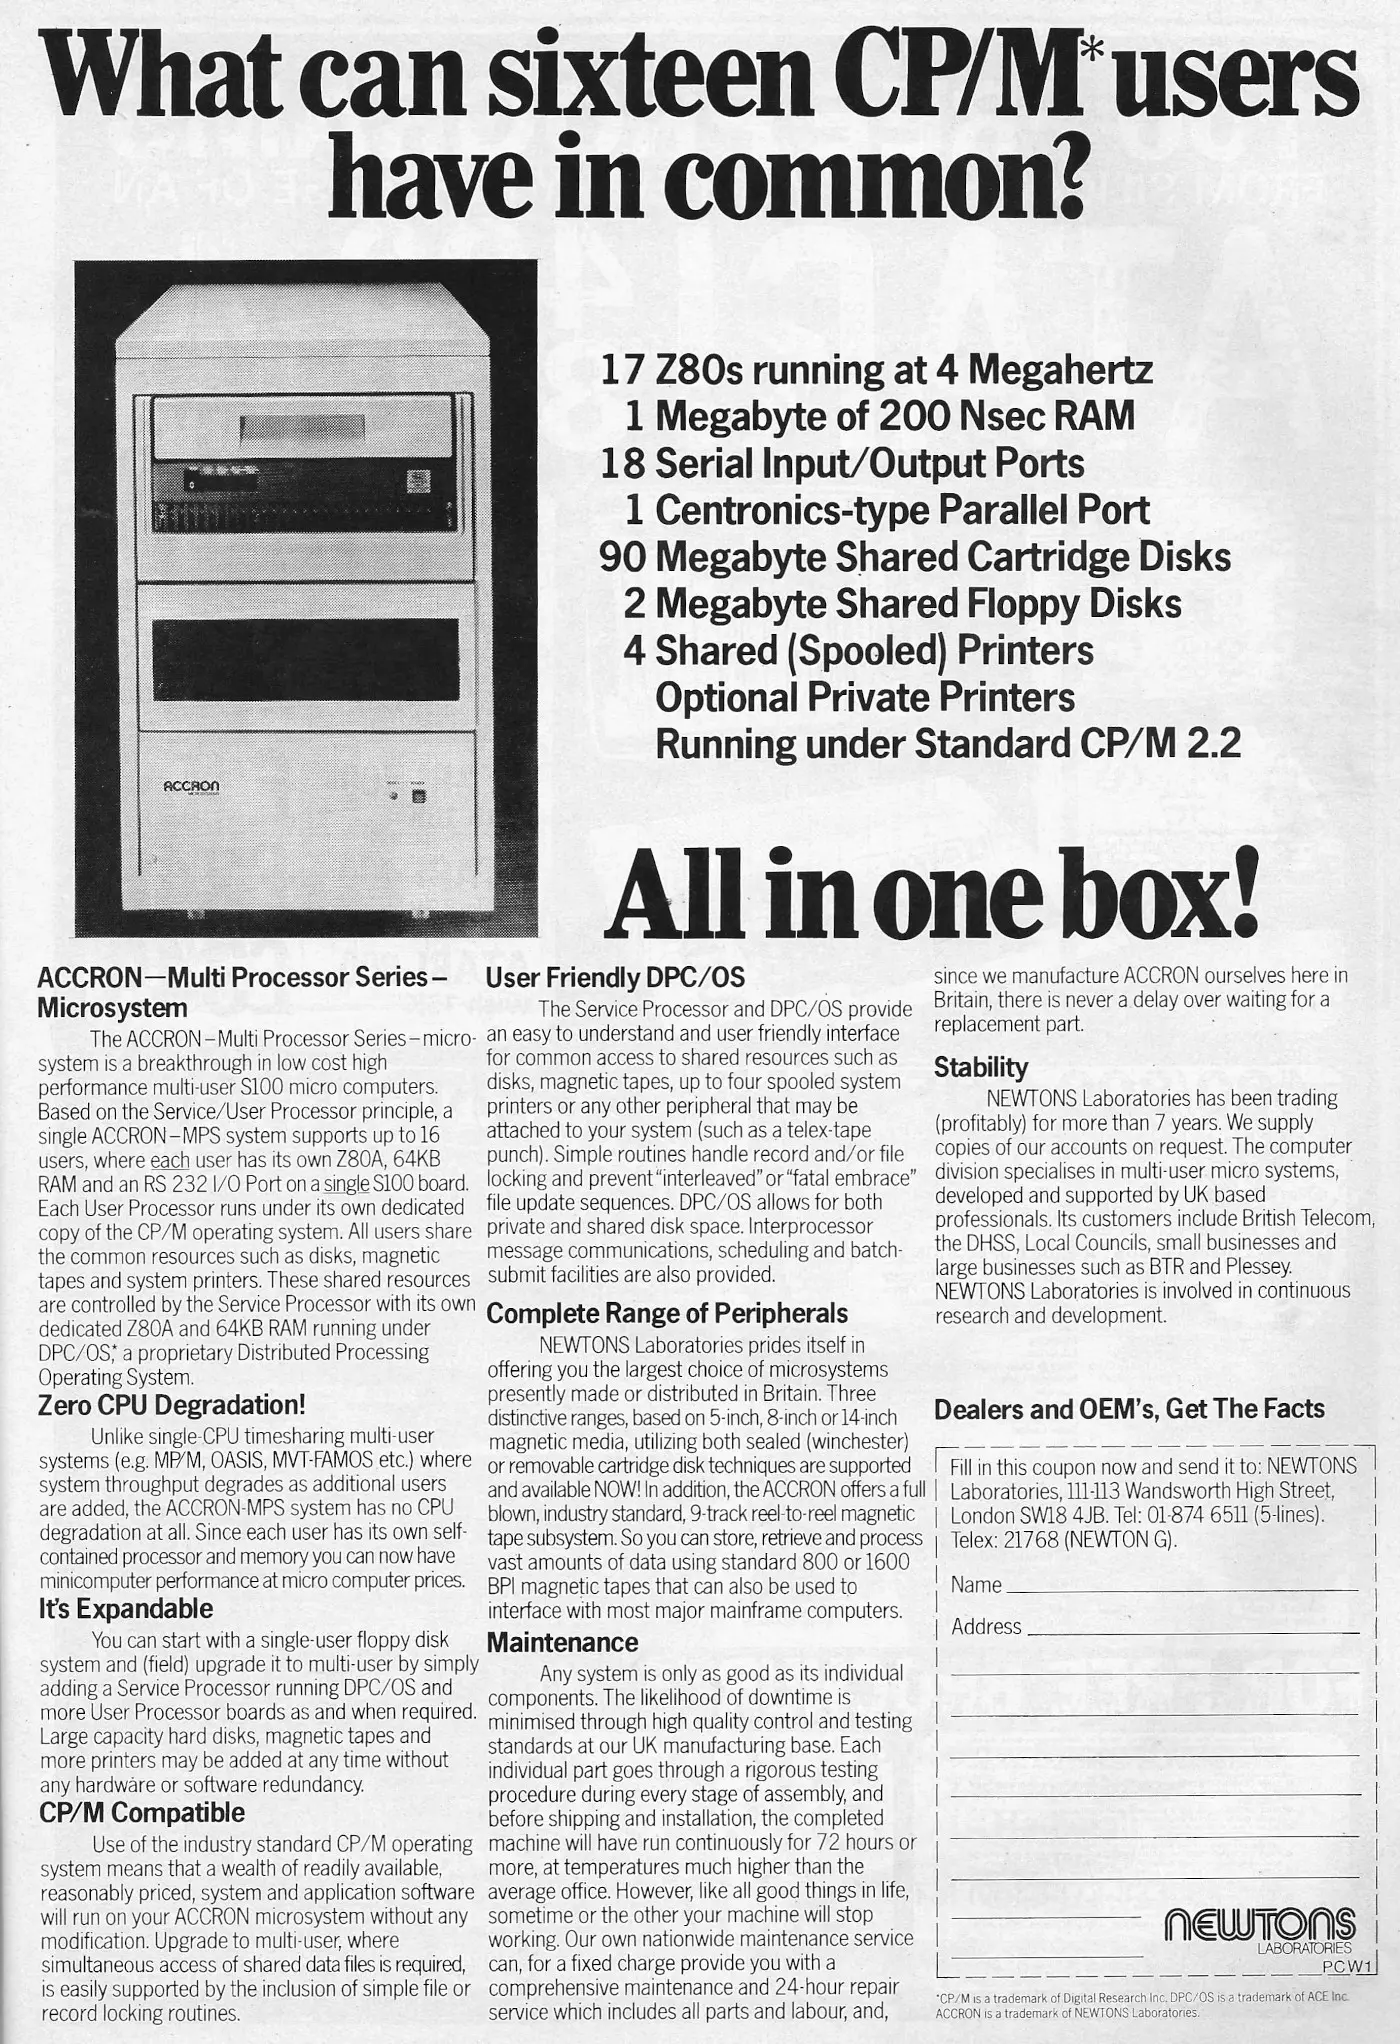 Newtons Laboratories Advert: What can 16 CP/M user have in common?, from Personal Computer World, March 1983